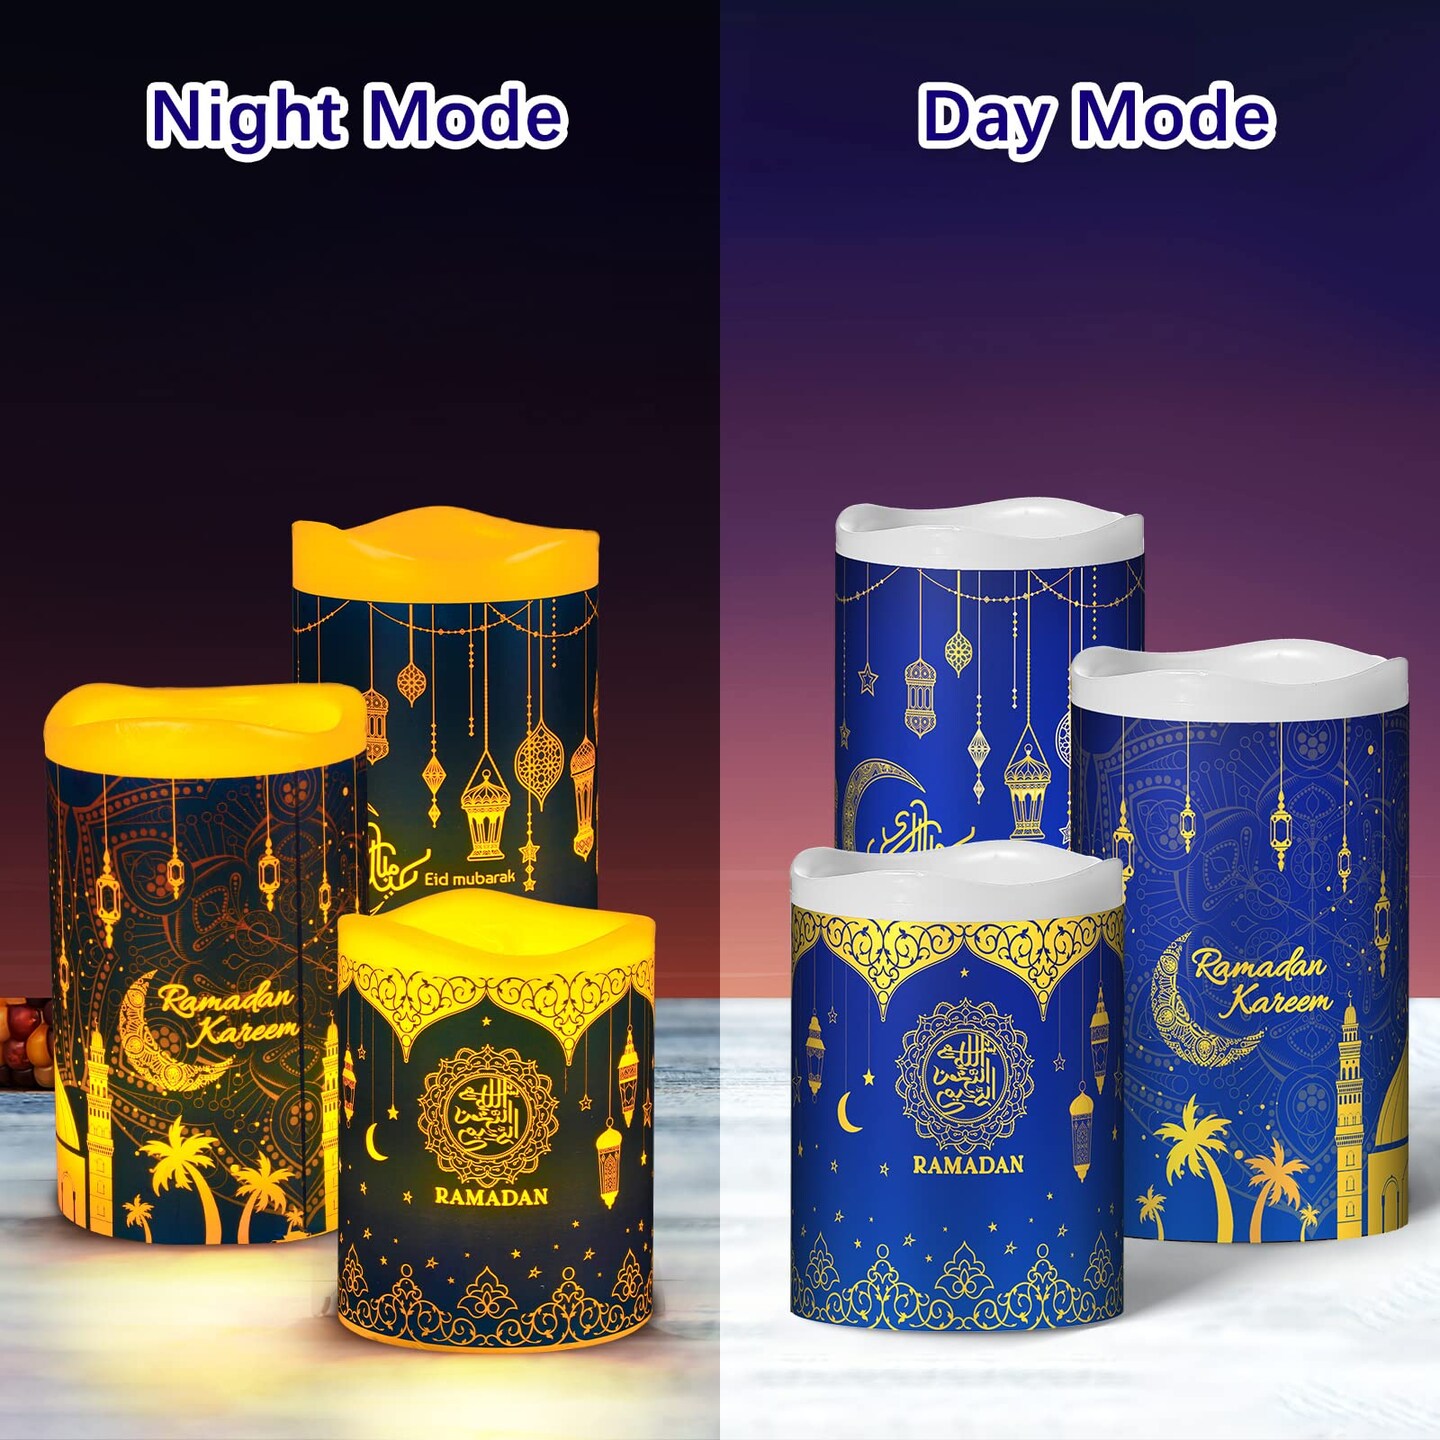 3 Pieces Eid Mubarak Flameless LED Candles Lights Eid Decor Candle Lights with Timer Warm White Battery Operated Electric Led Muslim Ramadan Candle Lights for Party Supplies Home Decor